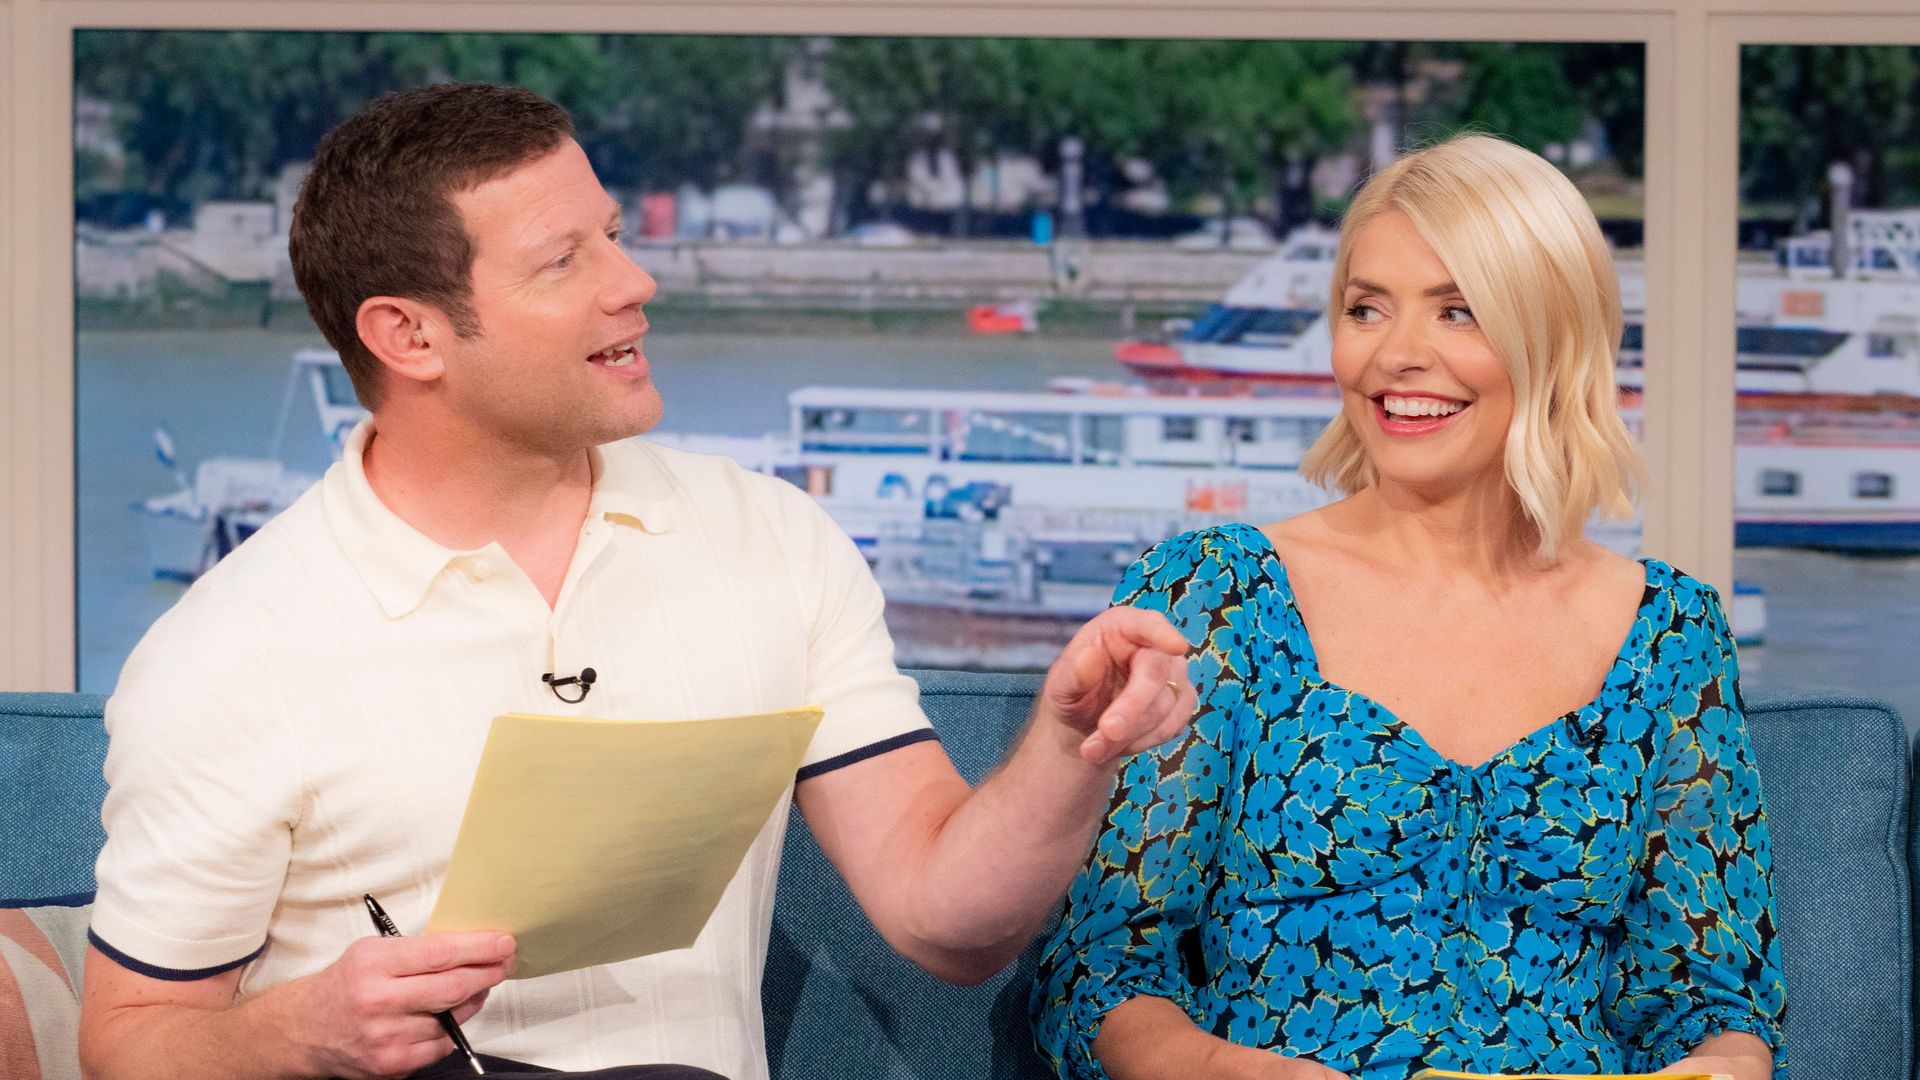 Dermot O'Leary and Holly Willoughby on
'This Morning' 